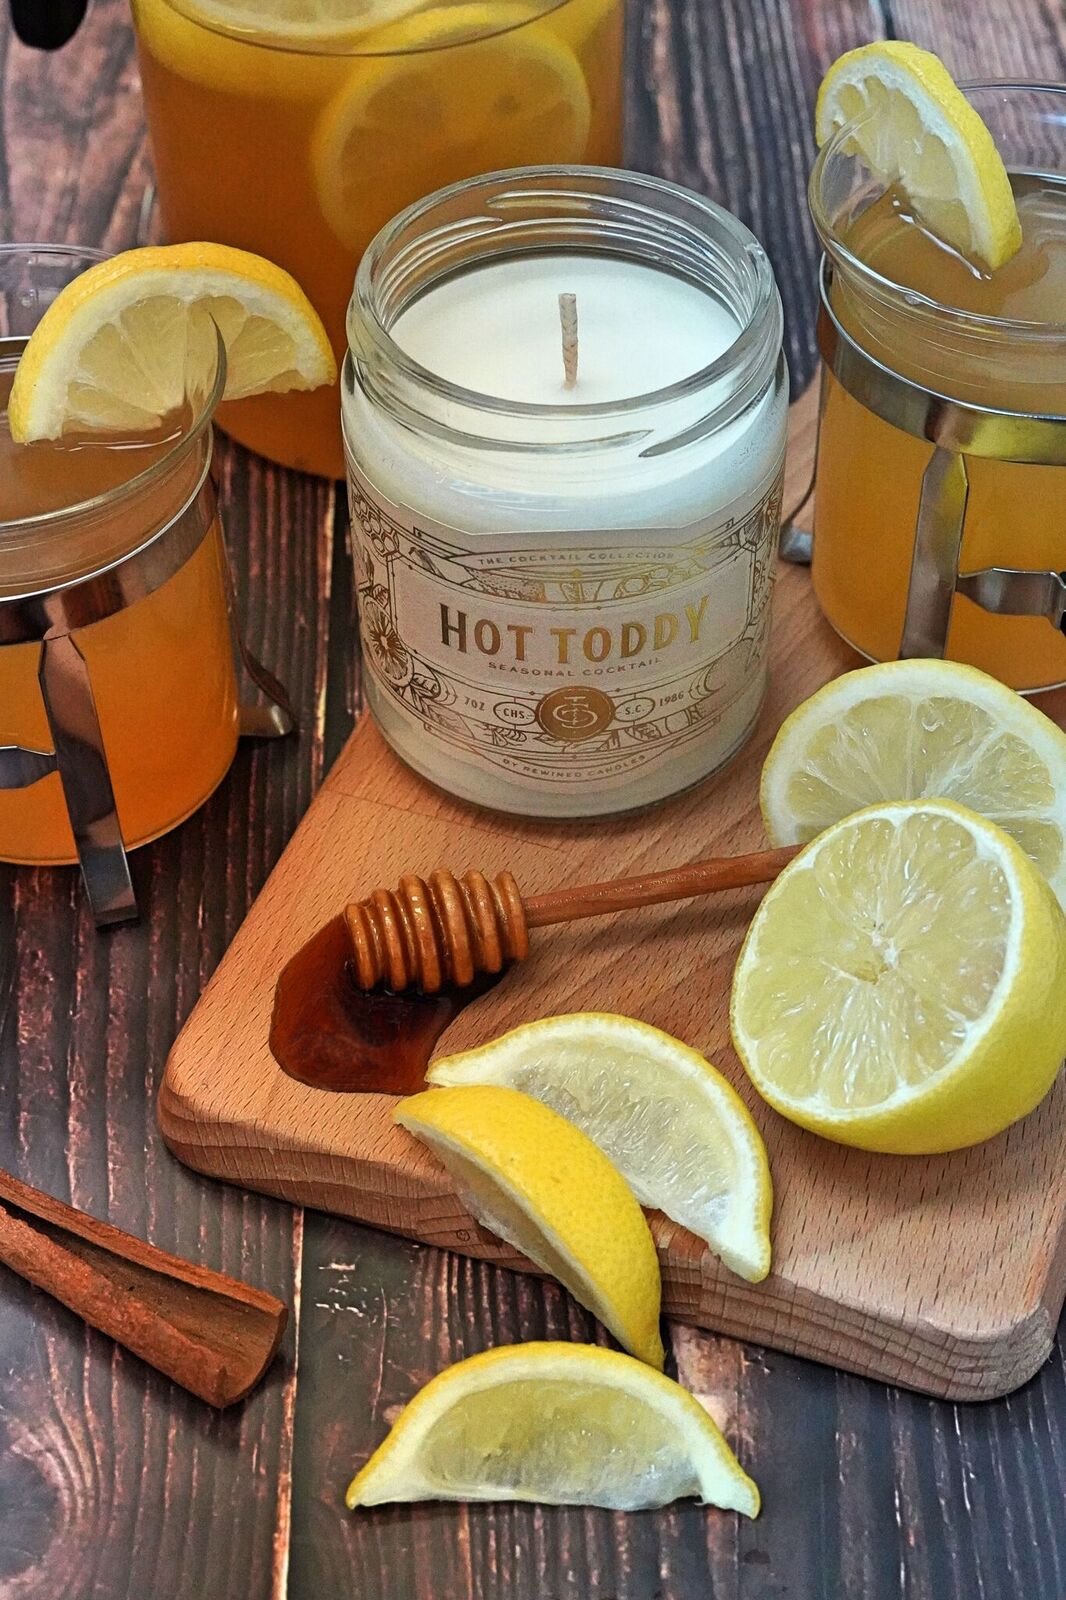 Hot Toddy Candle 7 oz